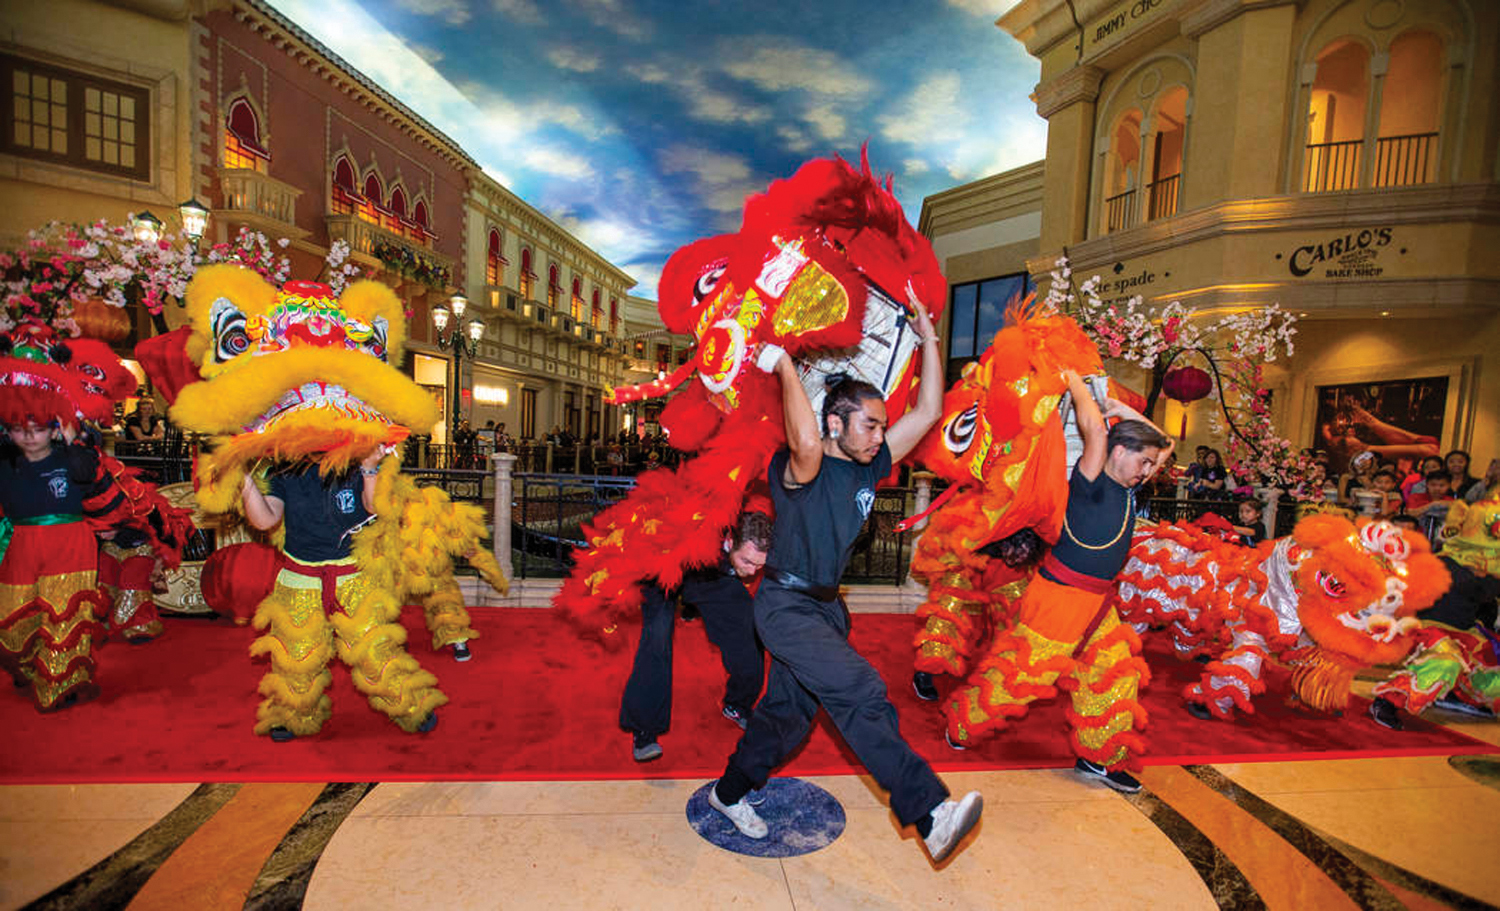 Lunar New Year has become a Las Vegas cultural staple - Las Vegas Weekly